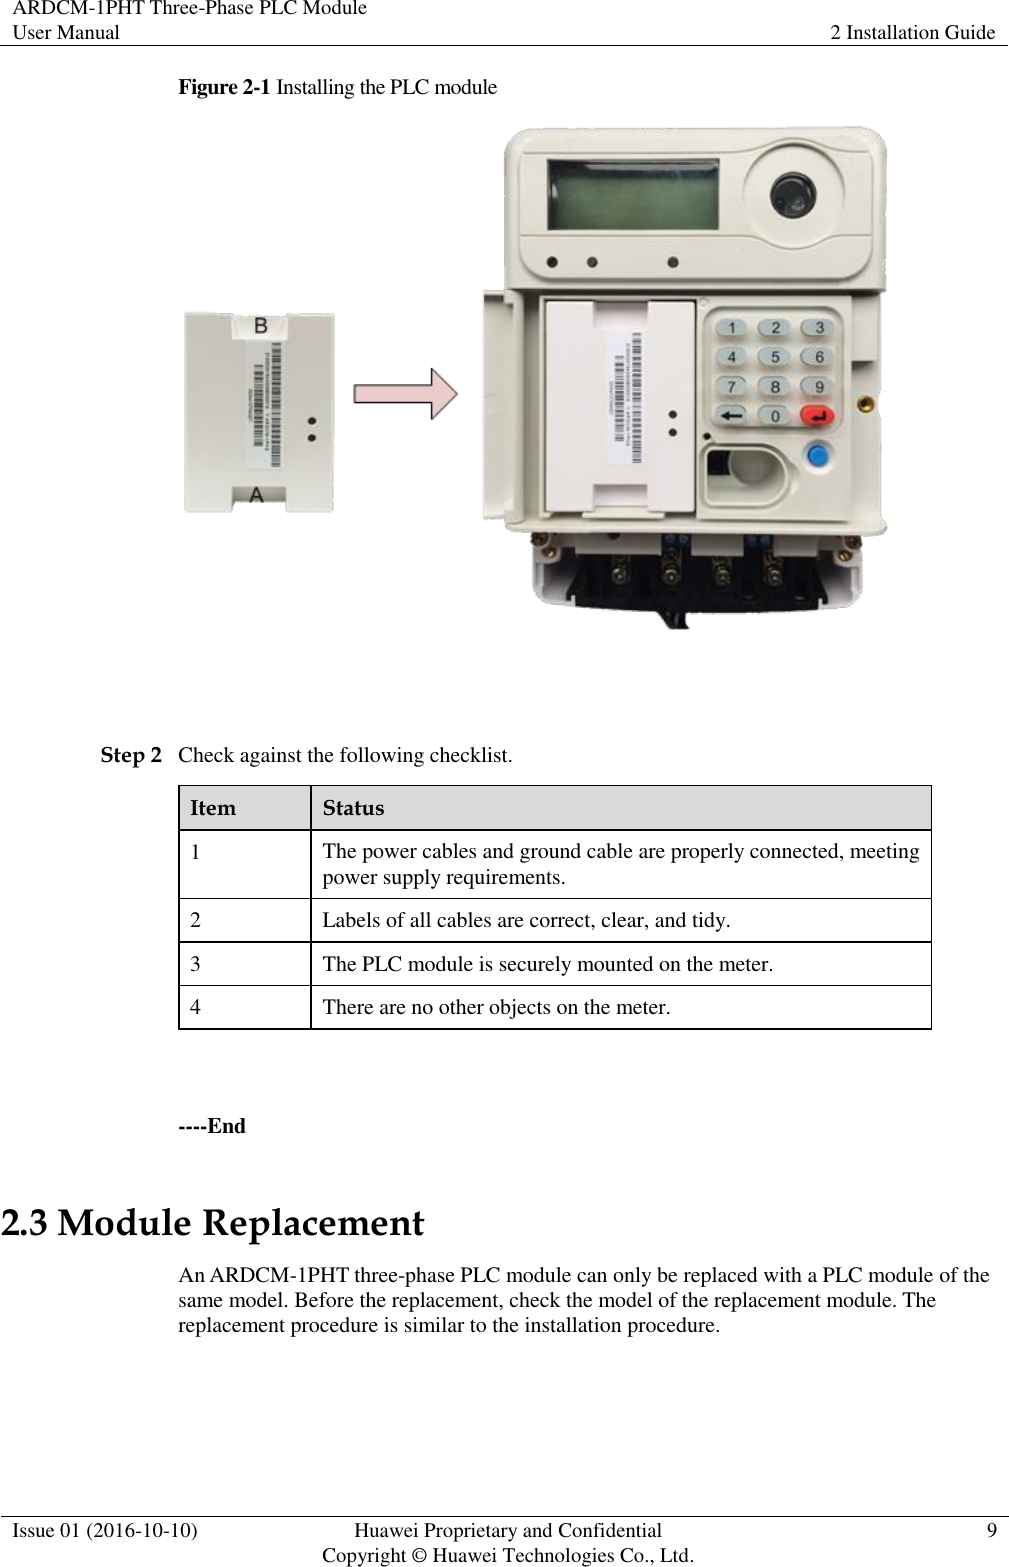 ARDCM-1PHT Three-Phase PLC Module User Manual 2 Installation Guide  Issue 01 (2016-10-10) Huawei Proprietary and Confidential Copyright © Huawei Technologies Co., Ltd. 9  Figure 2-1 Installing the PLC module   Step 2 Check against the following checklist. Item Status 1 The power cables and ground cable are properly connected, meeting power supply requirements. 2 Labels of all cables are correct, clear, and tidy. 3 The PLC module is securely mounted on the meter. 4 There are no other objects on the meter.  ----End 2.3 Module Replacement An ARDCM-1PHT three-phase PLC module can only be replaced with a PLC module of the same model. Before the replacement, check the model of the replacement module. The replacement procedure is similar to the installation procedure.  